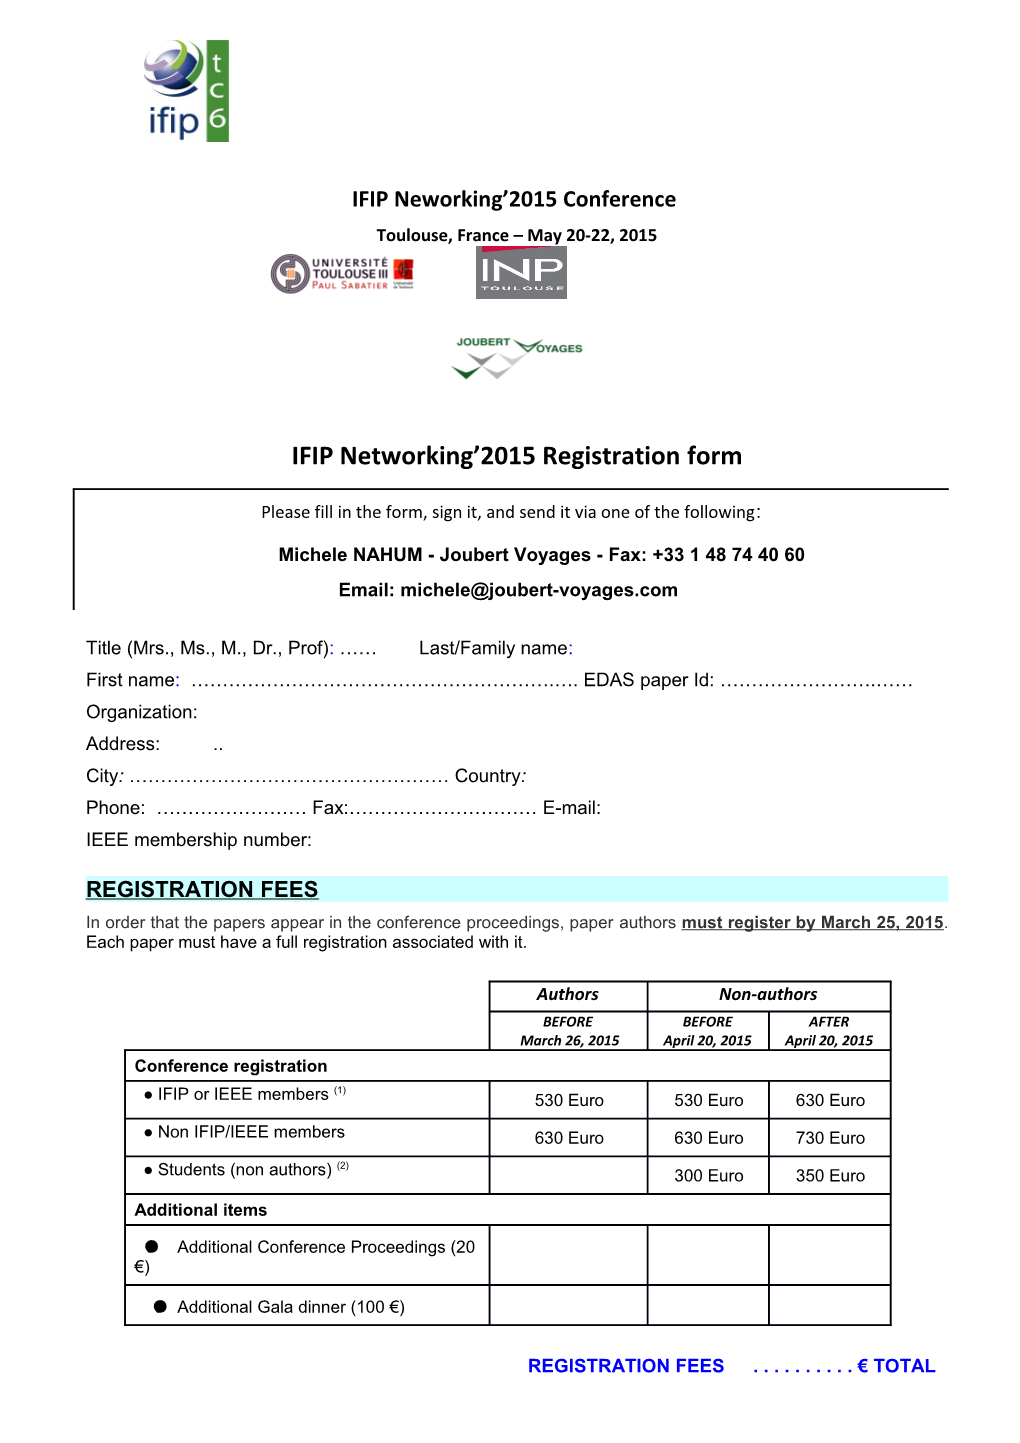 IFIP Networking 2015 Registration Form